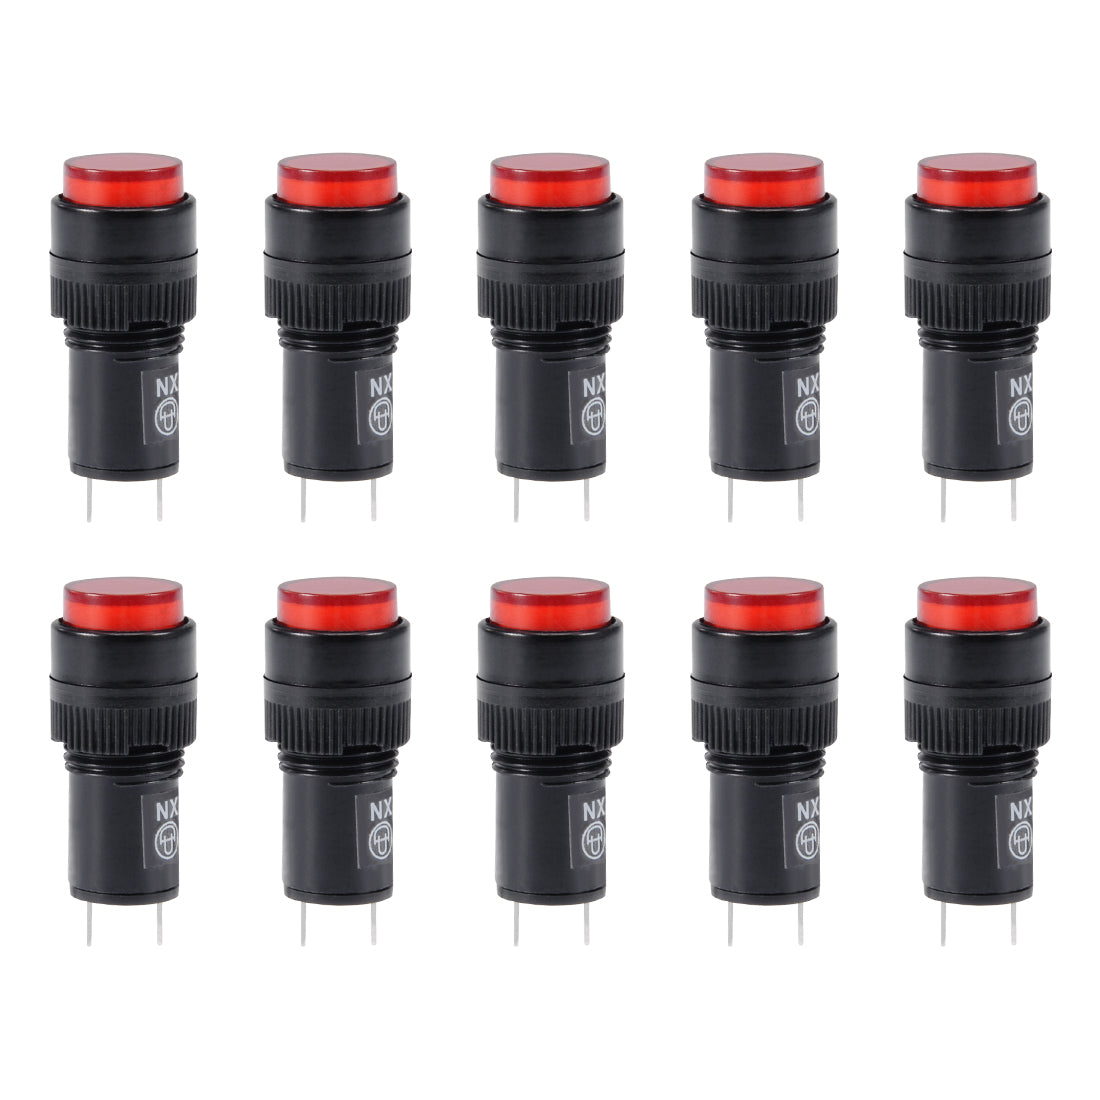 Uxcell Uxcell Indicator Lights DC 24V, NXD-215 Red Neon Bulb, Flush Panel Mount 5/16" 8mm, 10Pcs